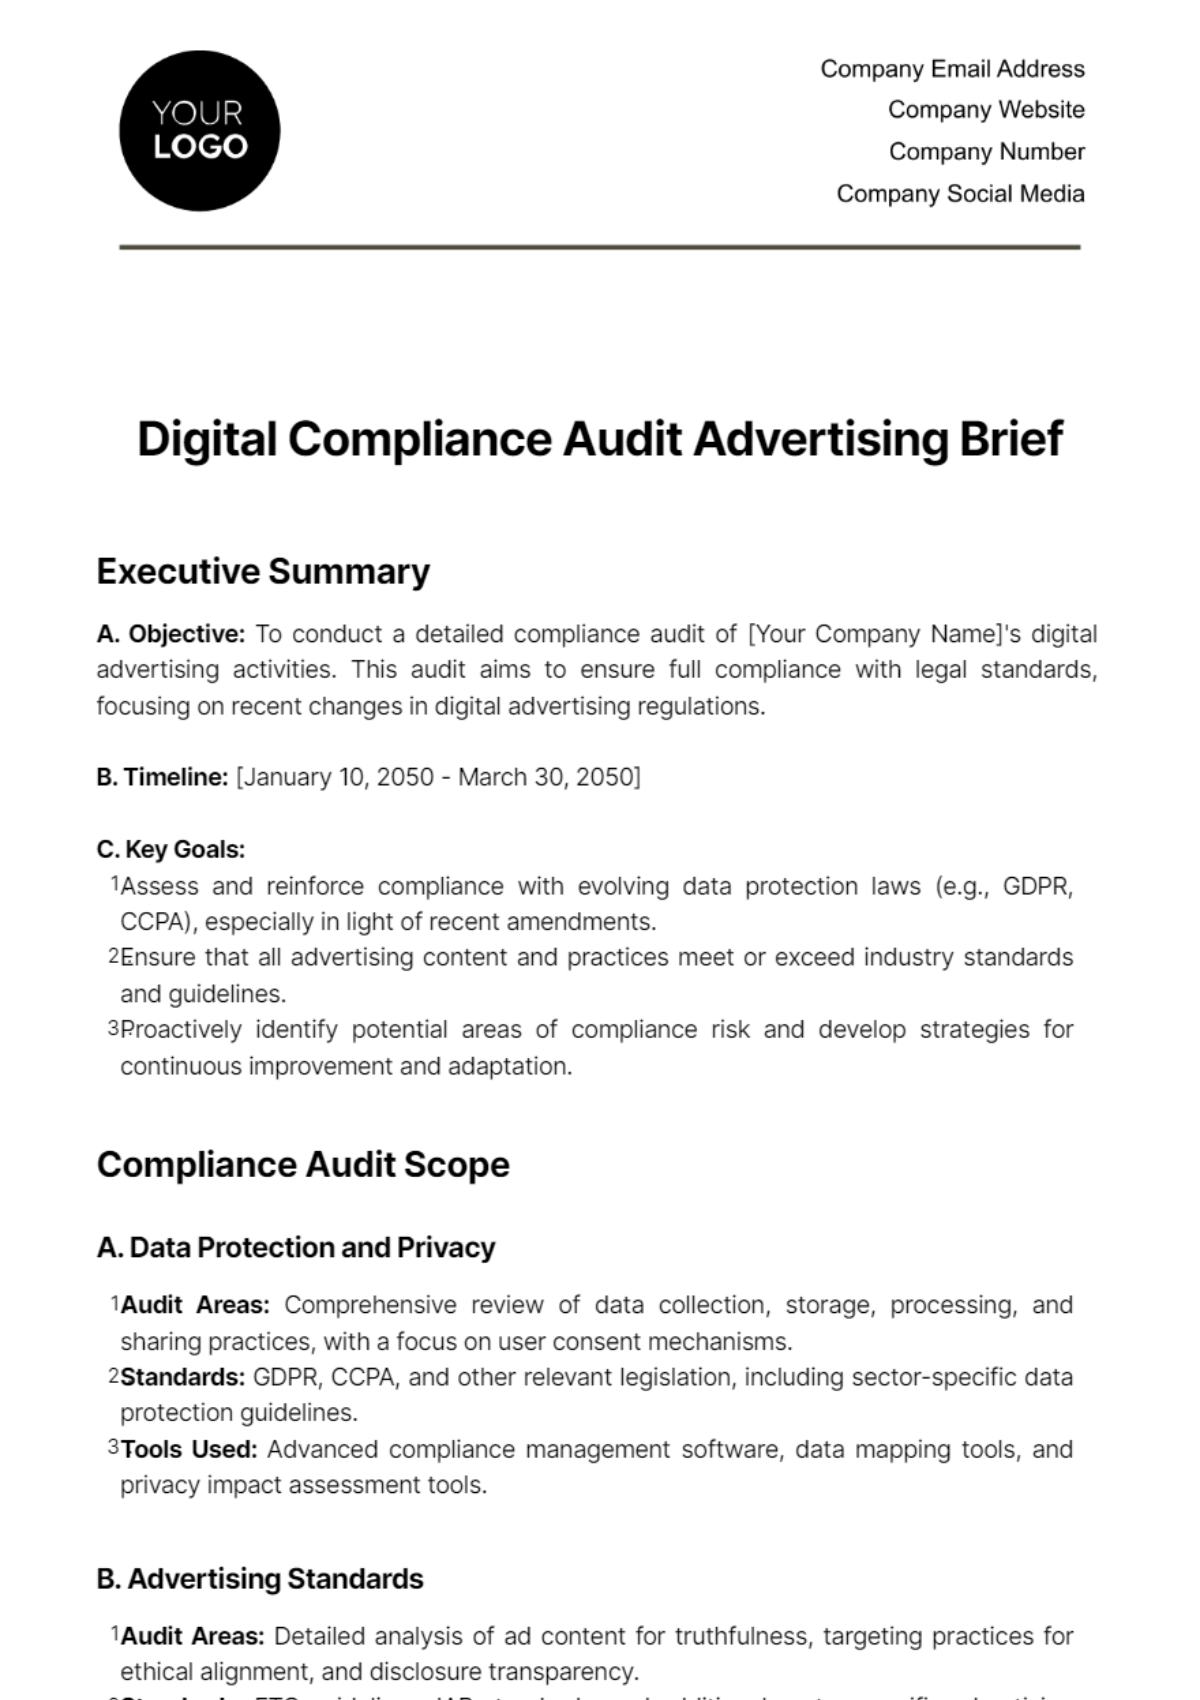 Free Digital Compliance Audit Advertising Brief Template